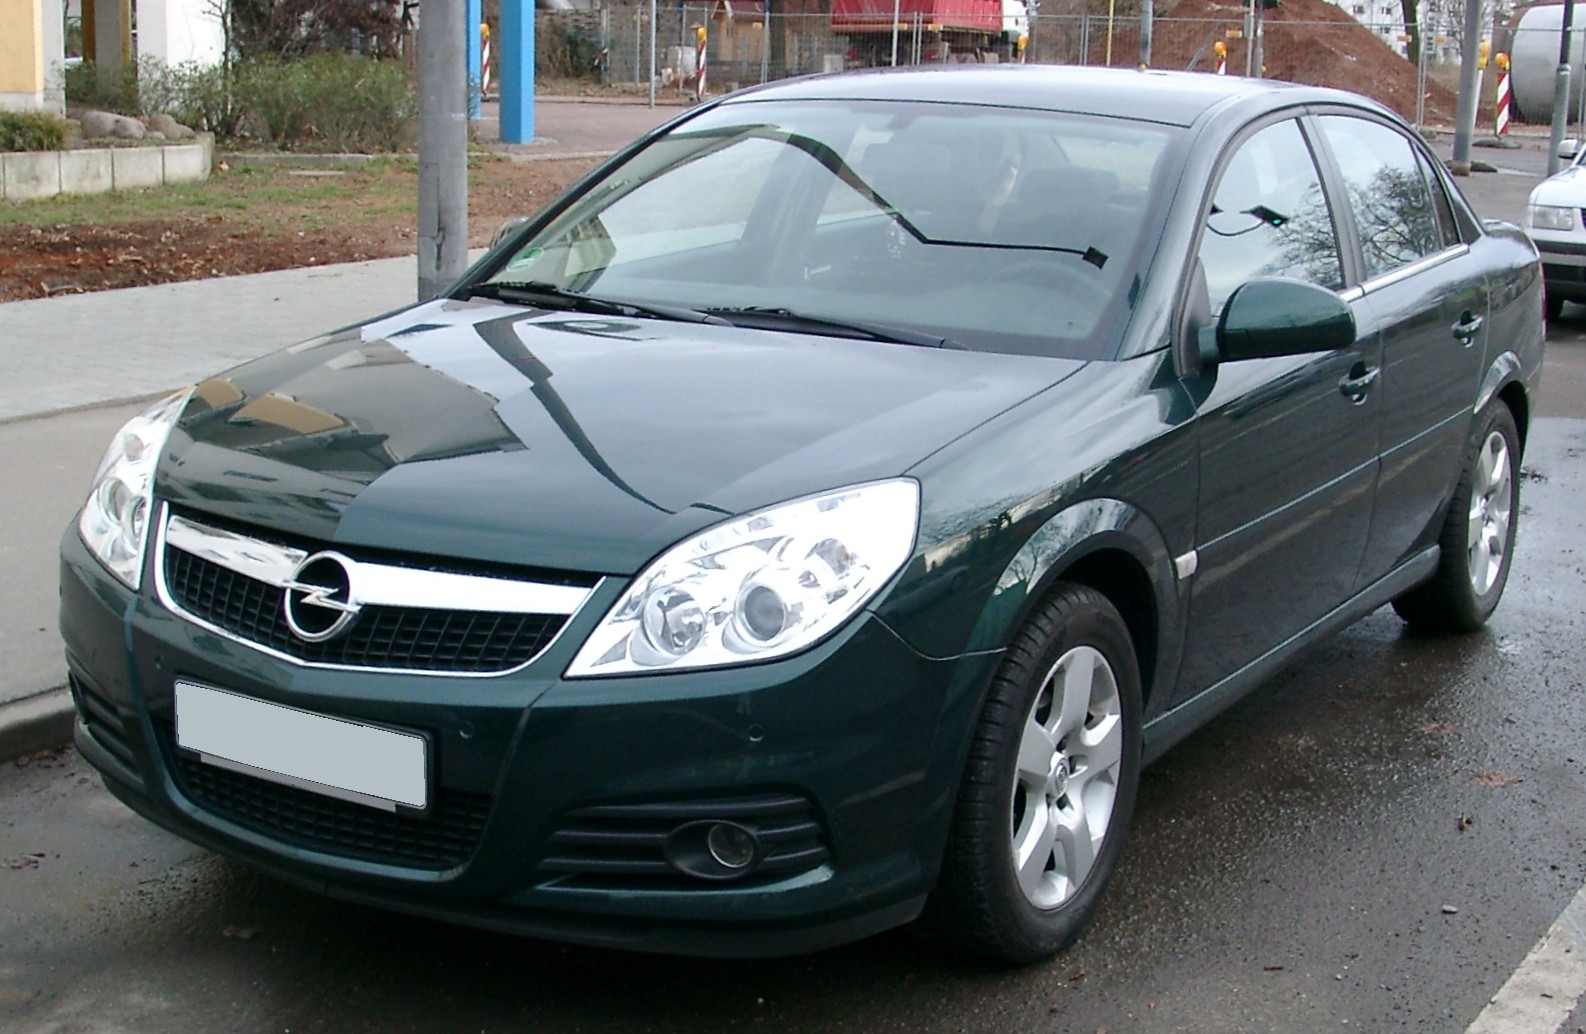 File:Opel Vectra front 20080116.jpg - Wikimedia Commons